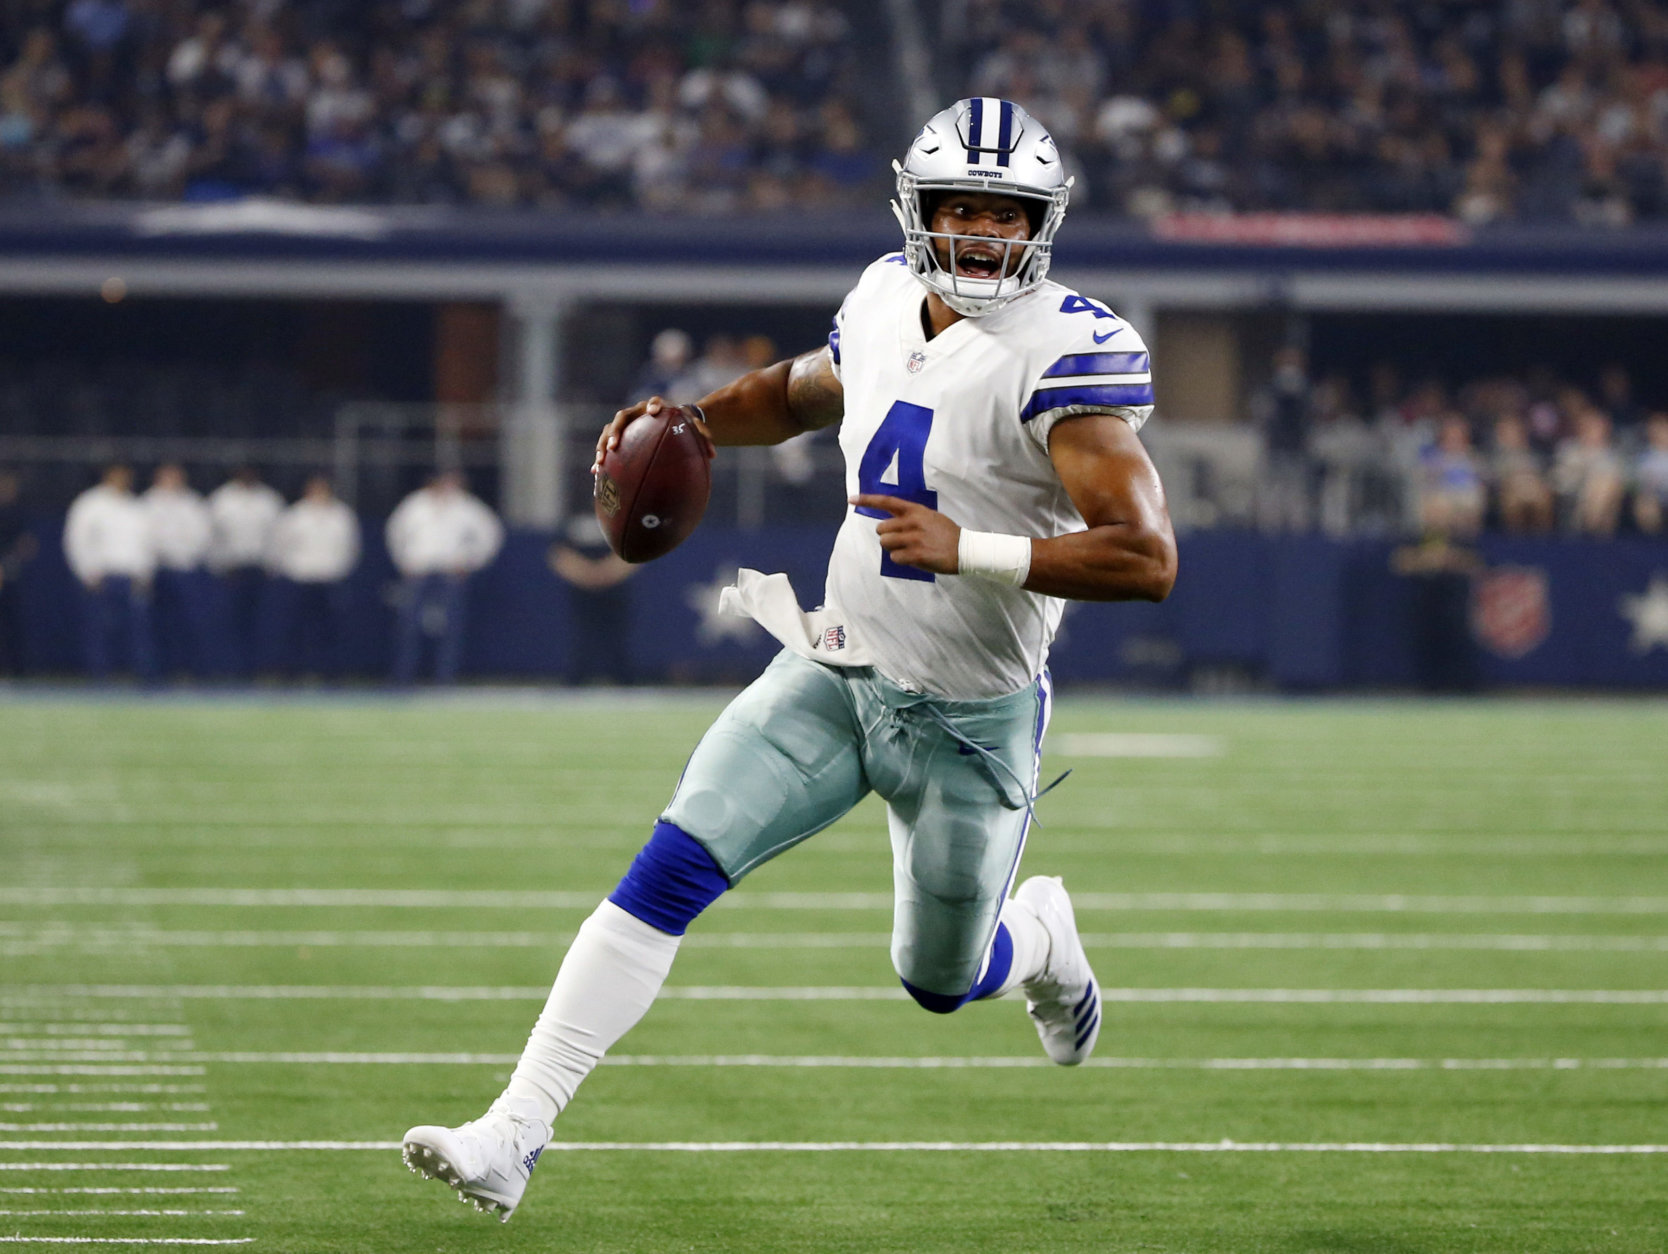 FILE - In this Aug. 18, 2018, file photo, Dallas Cowboys quarterback Dak Prescott (4) scrambles during the first half of a preseason NFL football game against the Cincinnati Bengals, in Arlington, Texas. Prescott dealt with the uncertainty of running back Ezekiel Elliott’s looming six-game suspension last year when the Dallas Cowboys slid from an NFC-best 13 wins to out of the playoffs. Now the star quarterback faces the unknown of a revamped and largely unproven group of receivers after the departures of Jason Witten and Dez Bryant. Elliott, Prescott’s fellow rookie standout from two years ago, is the supposed sure thing for a team looking up in the NFC East at defending Super Bowl champ Philadelphia.(AP Photo/Ron Jenkins, File)